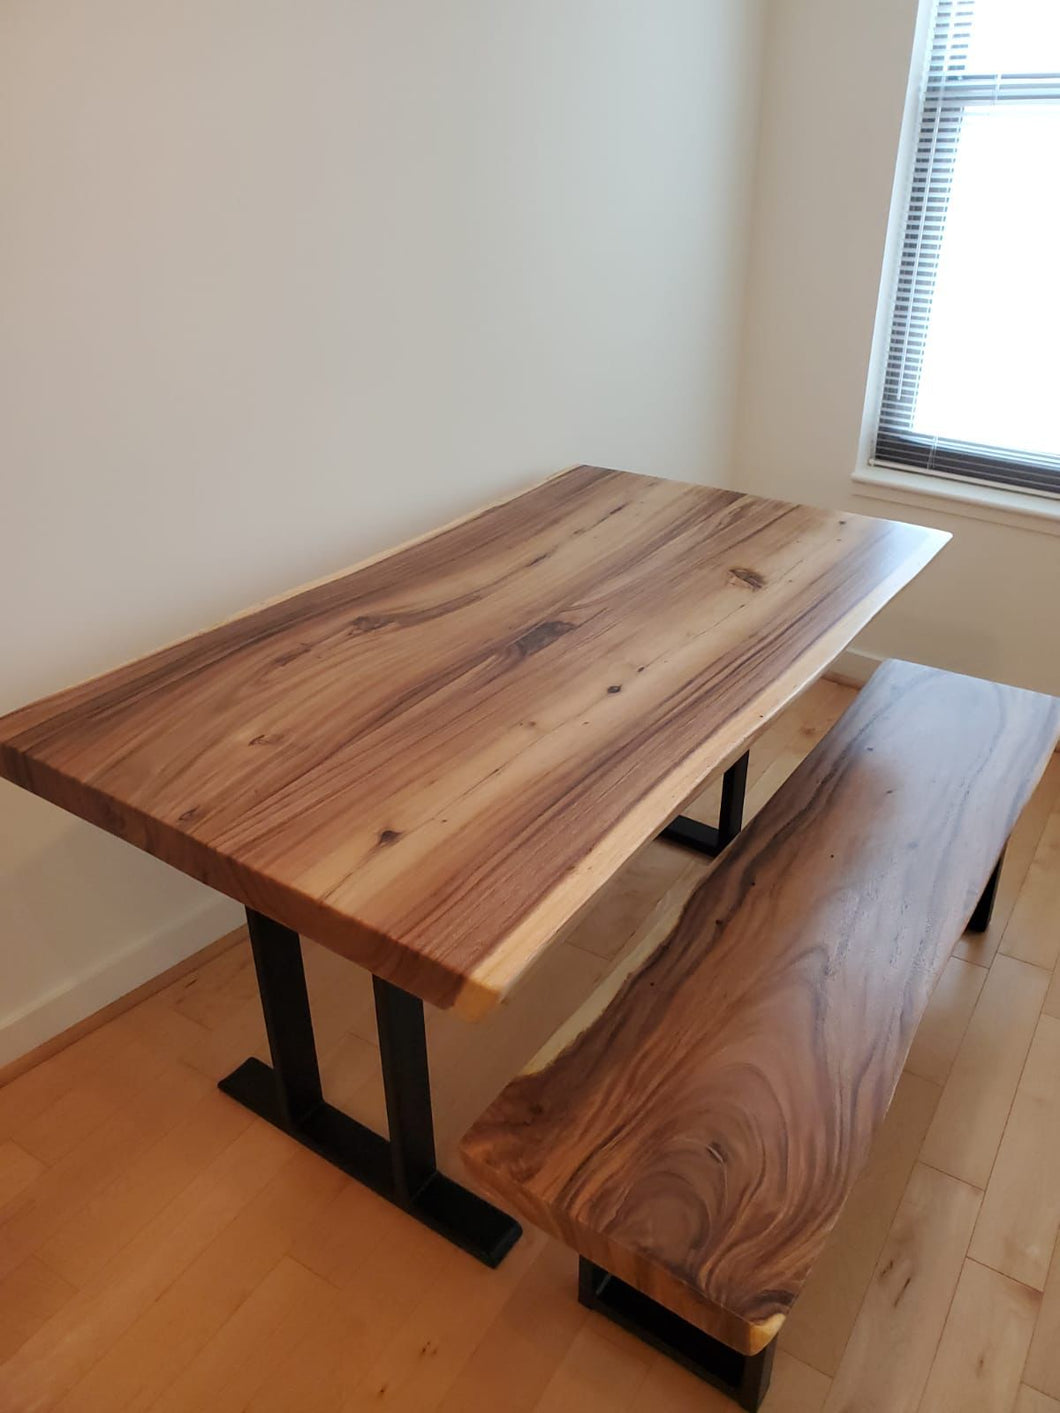 Live edge acacia dining table and bench